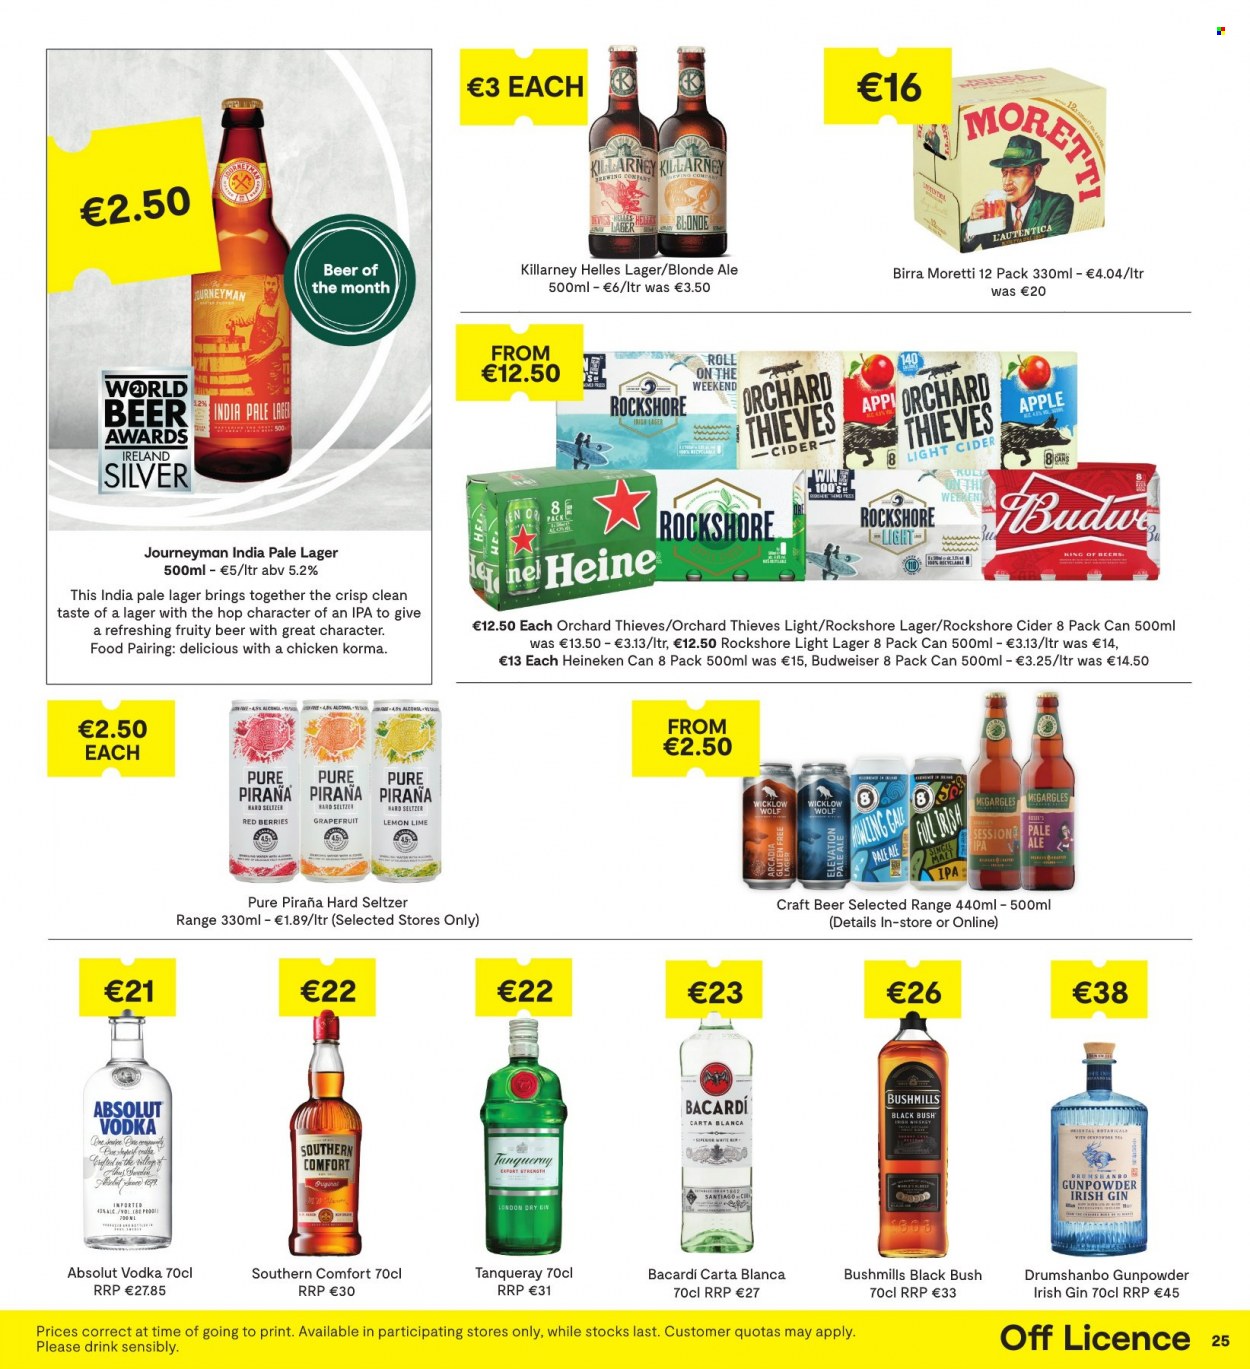 thumbnail - SuperValu offer  - 21.10.2021 - 03.11.2021 - Sales products - grapefruits, wine, alcohol, Bacardi, gin, vodka, whiskey, irish whiskey, Absolut, Pure Piraña, Hard Seltzer, whisky, cider, beer, Heineken, Lager, IPA, Rockshore, E45, roll-on, Budweiser. Page 25.